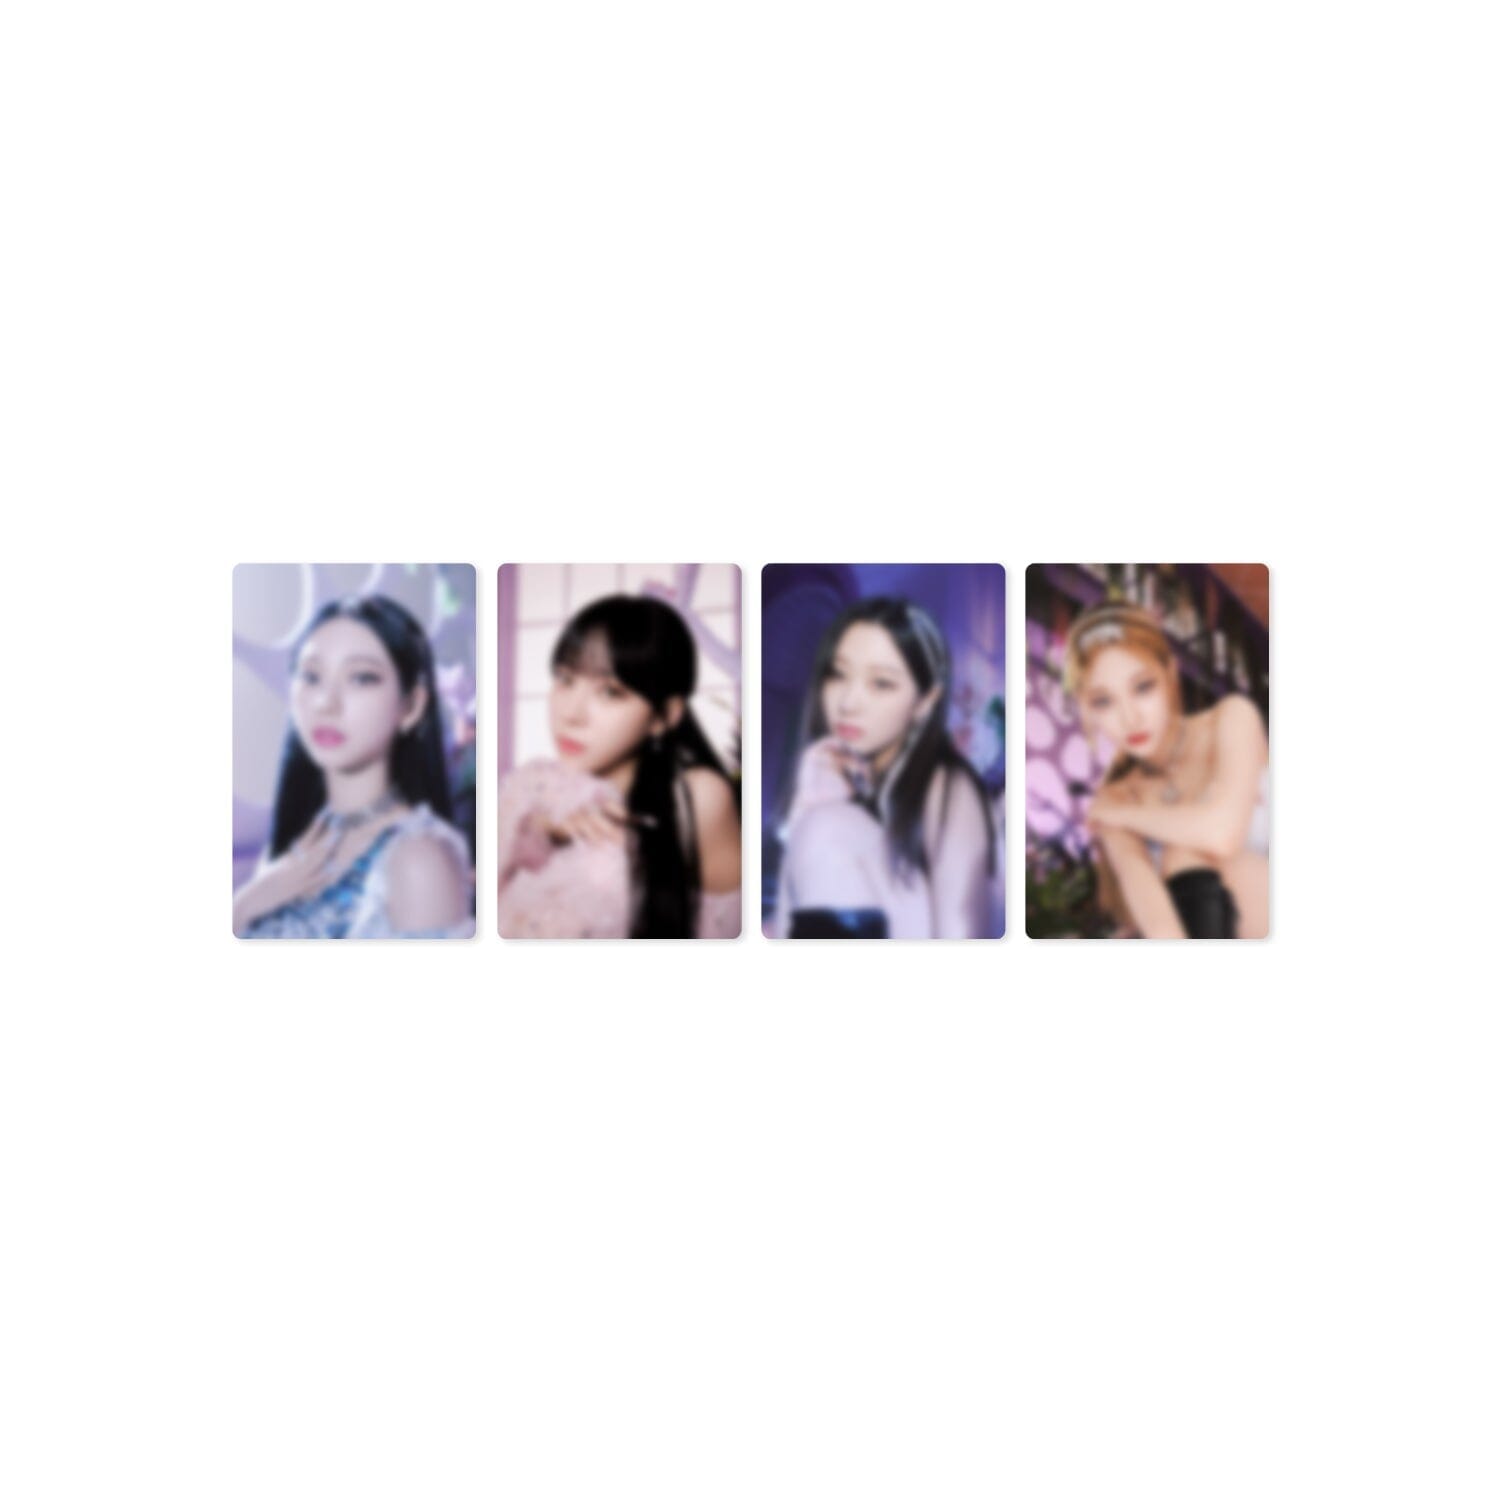 [SGS] aespa 'Dreams Come True' Clear Card Wallet with Sticker Set + SGS Exclusive photocard